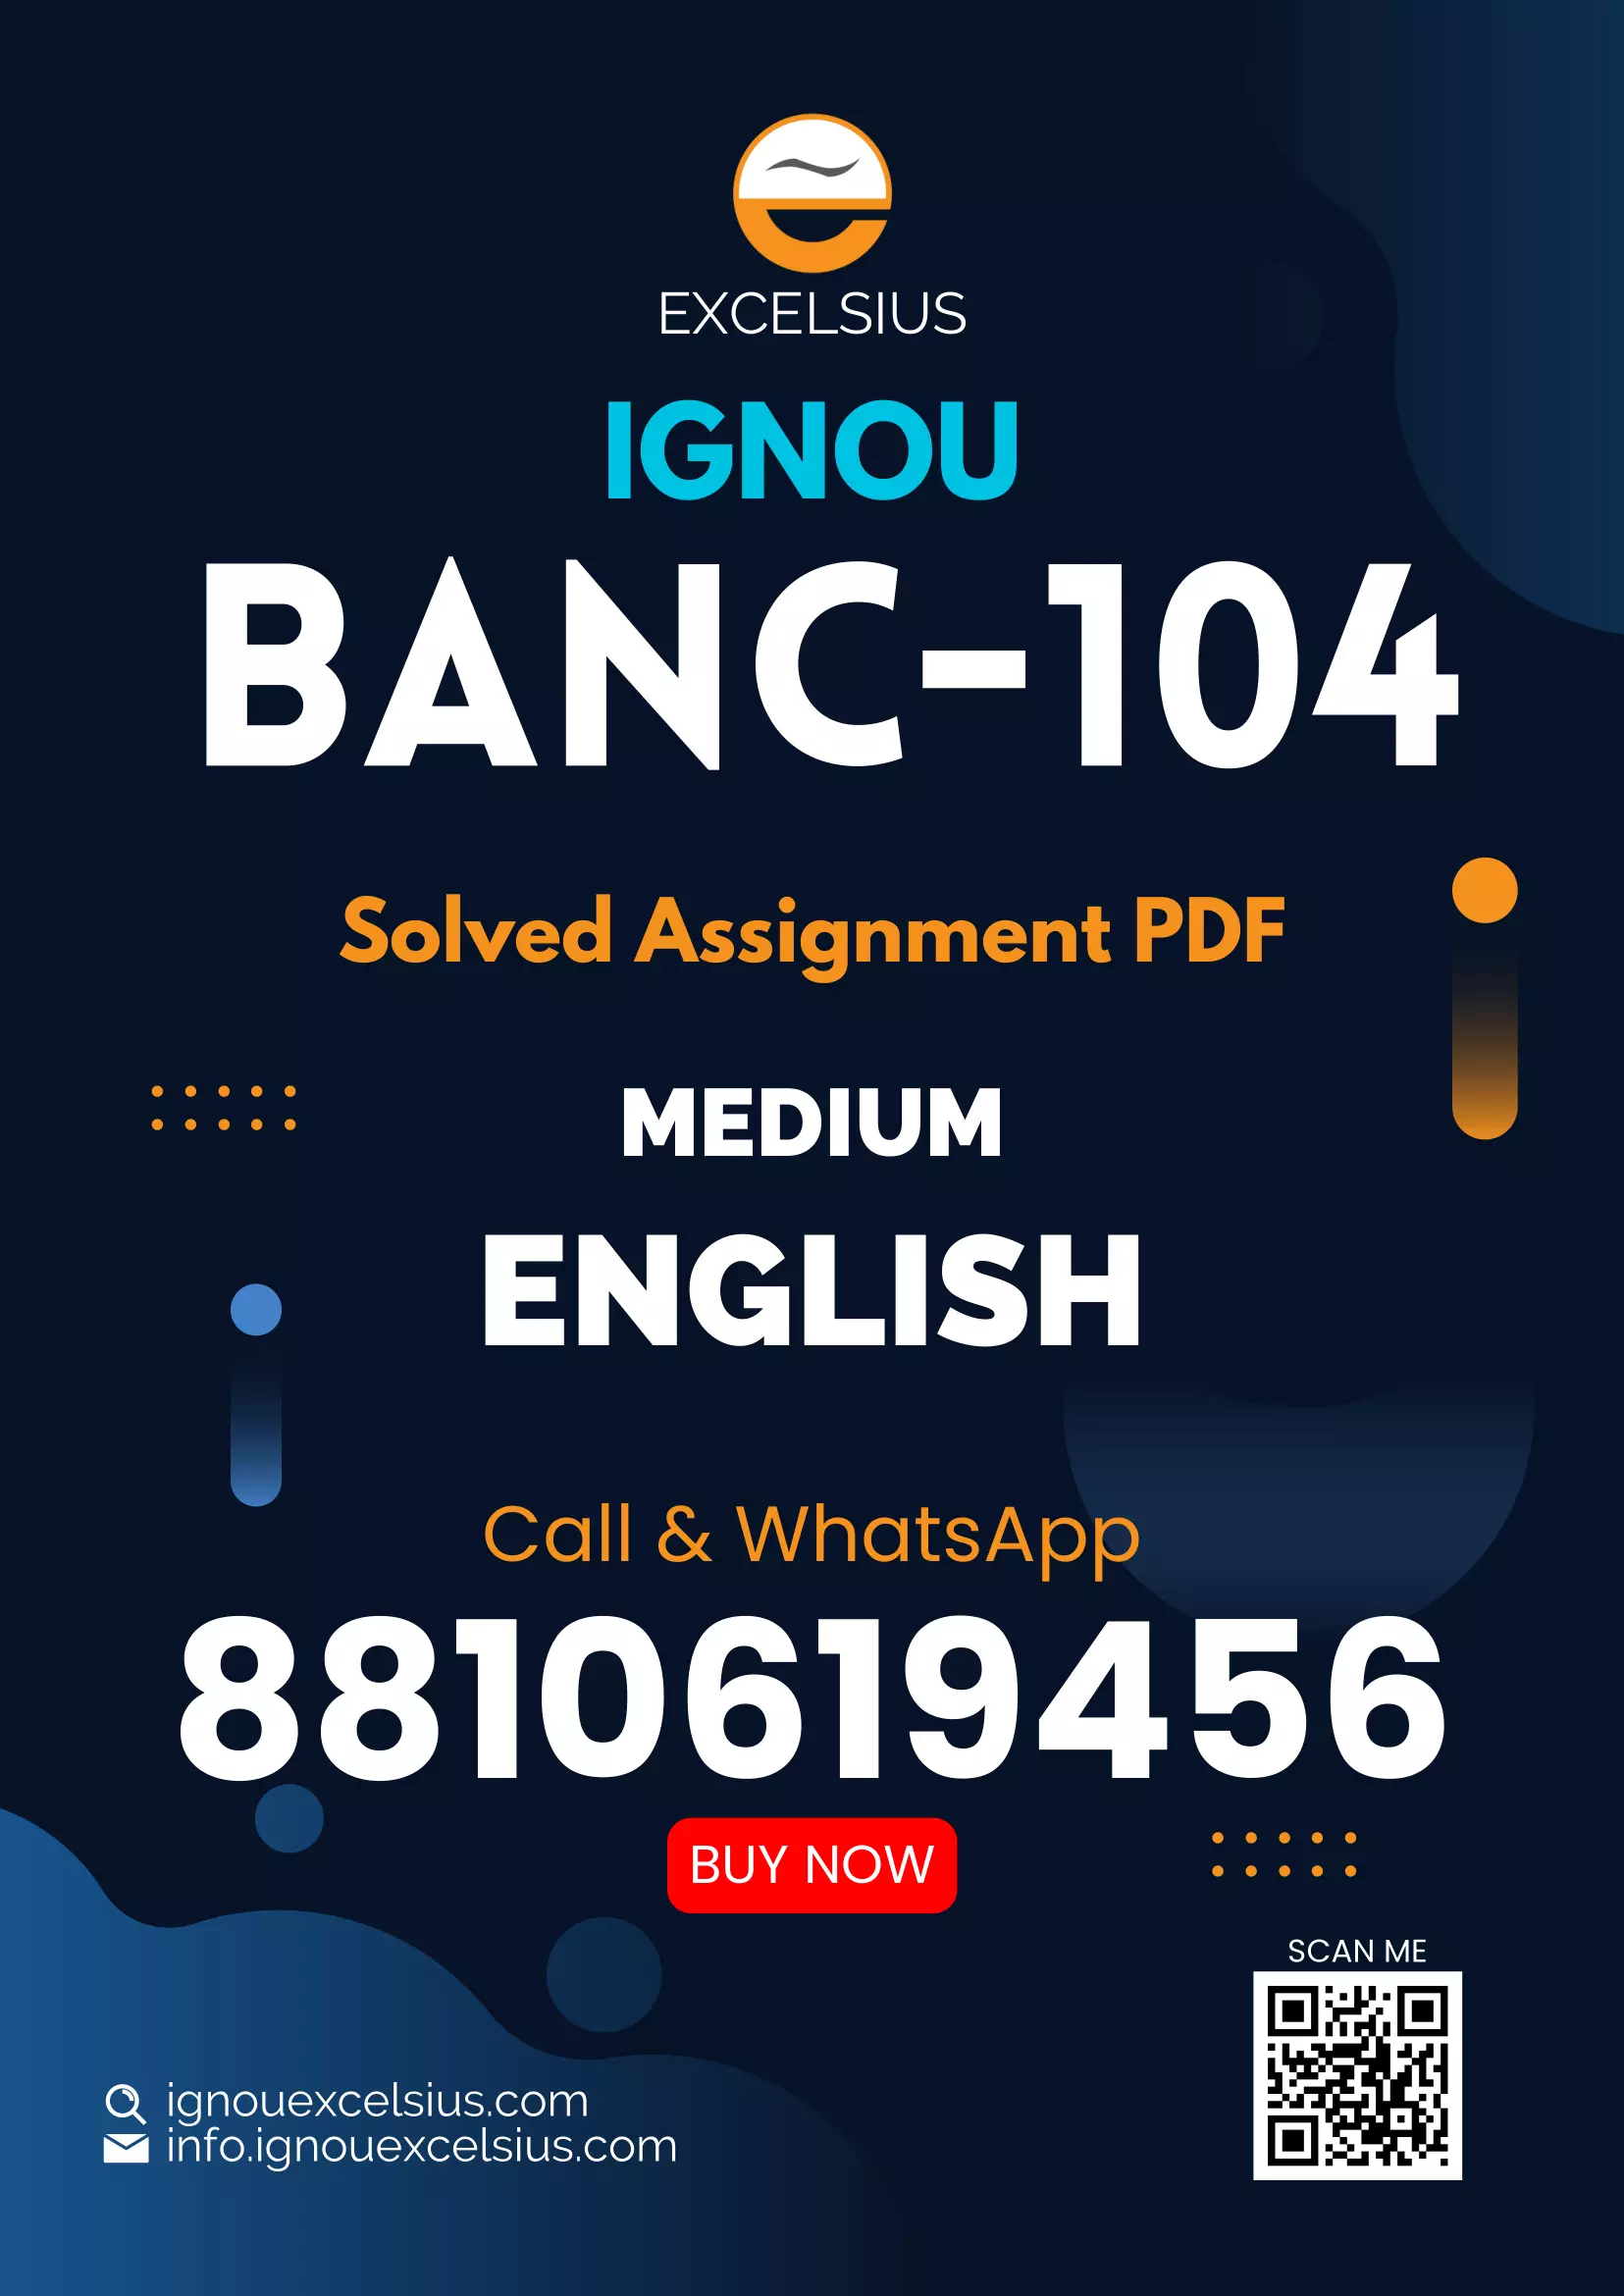 IGNOU BANC-104 - Human Origin and Evolution, Latest Solved Assignment-July 2022 – January 2023